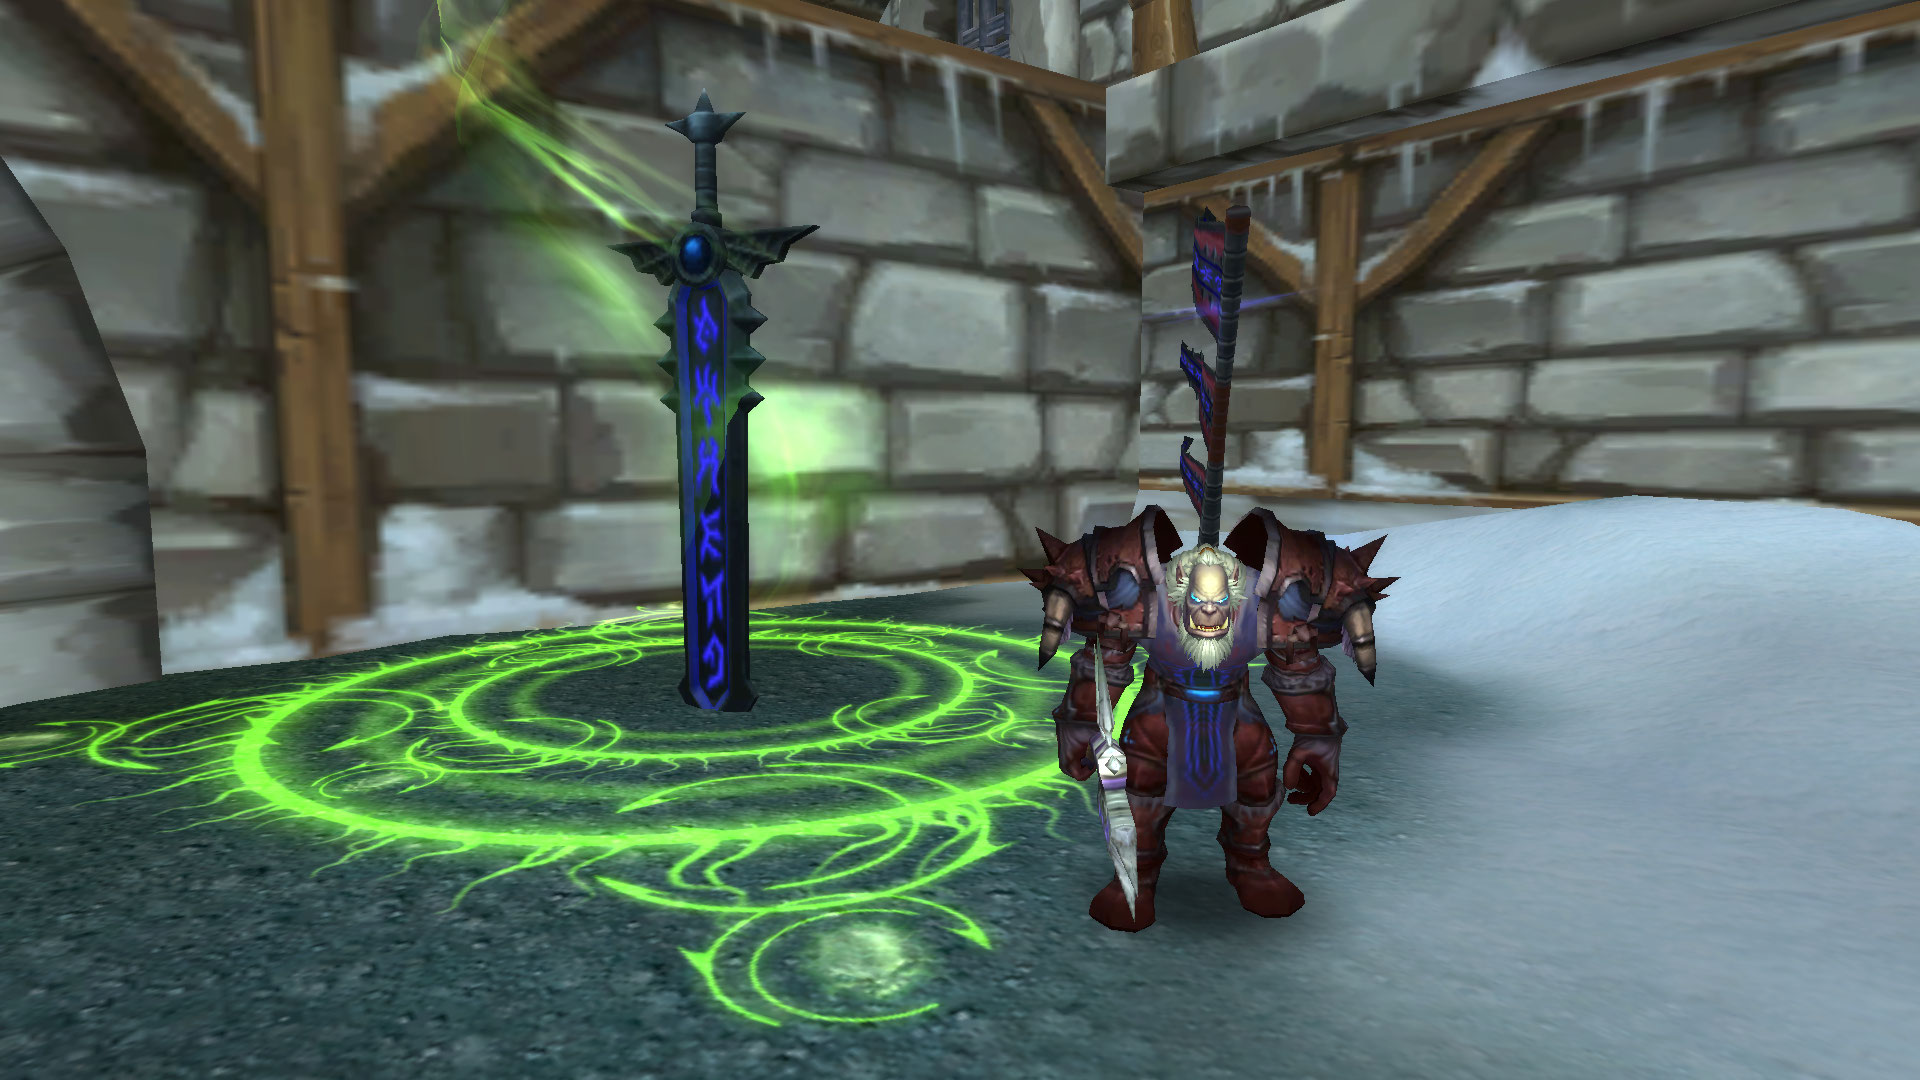 WoW Orc and Big Runic Sword